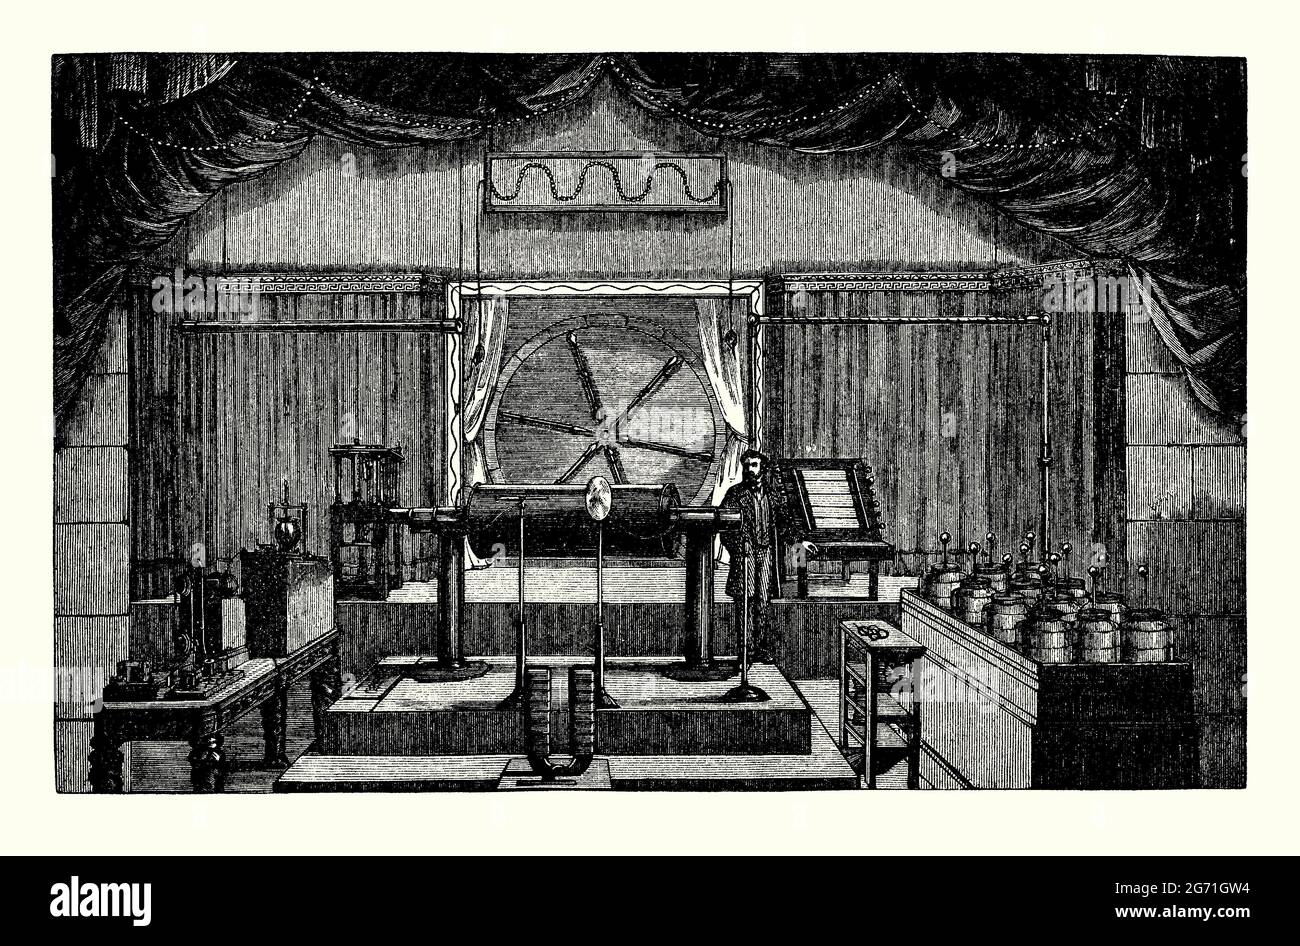 An old engraving of an induction coil, demonstrated at the Polytechnic Institution in London, England, UK c.1877. It is from a book of the 1890s on Victorian discoveries and inventions during the 1800s. An induction coil (or spark or Ruhmkorff coil) is an electrical transformer (the first) used to produce high-voltage pulses from a low-voltage direct current (DC) supply. This large induction coil, made in 1877 by British instrument maker Alfred Apps for scientist William Spottiswoode, could produce a spark 40 inches (100 cm) long, corresponding to a voltage of roughly 1,200,000 volts. Stock Photo